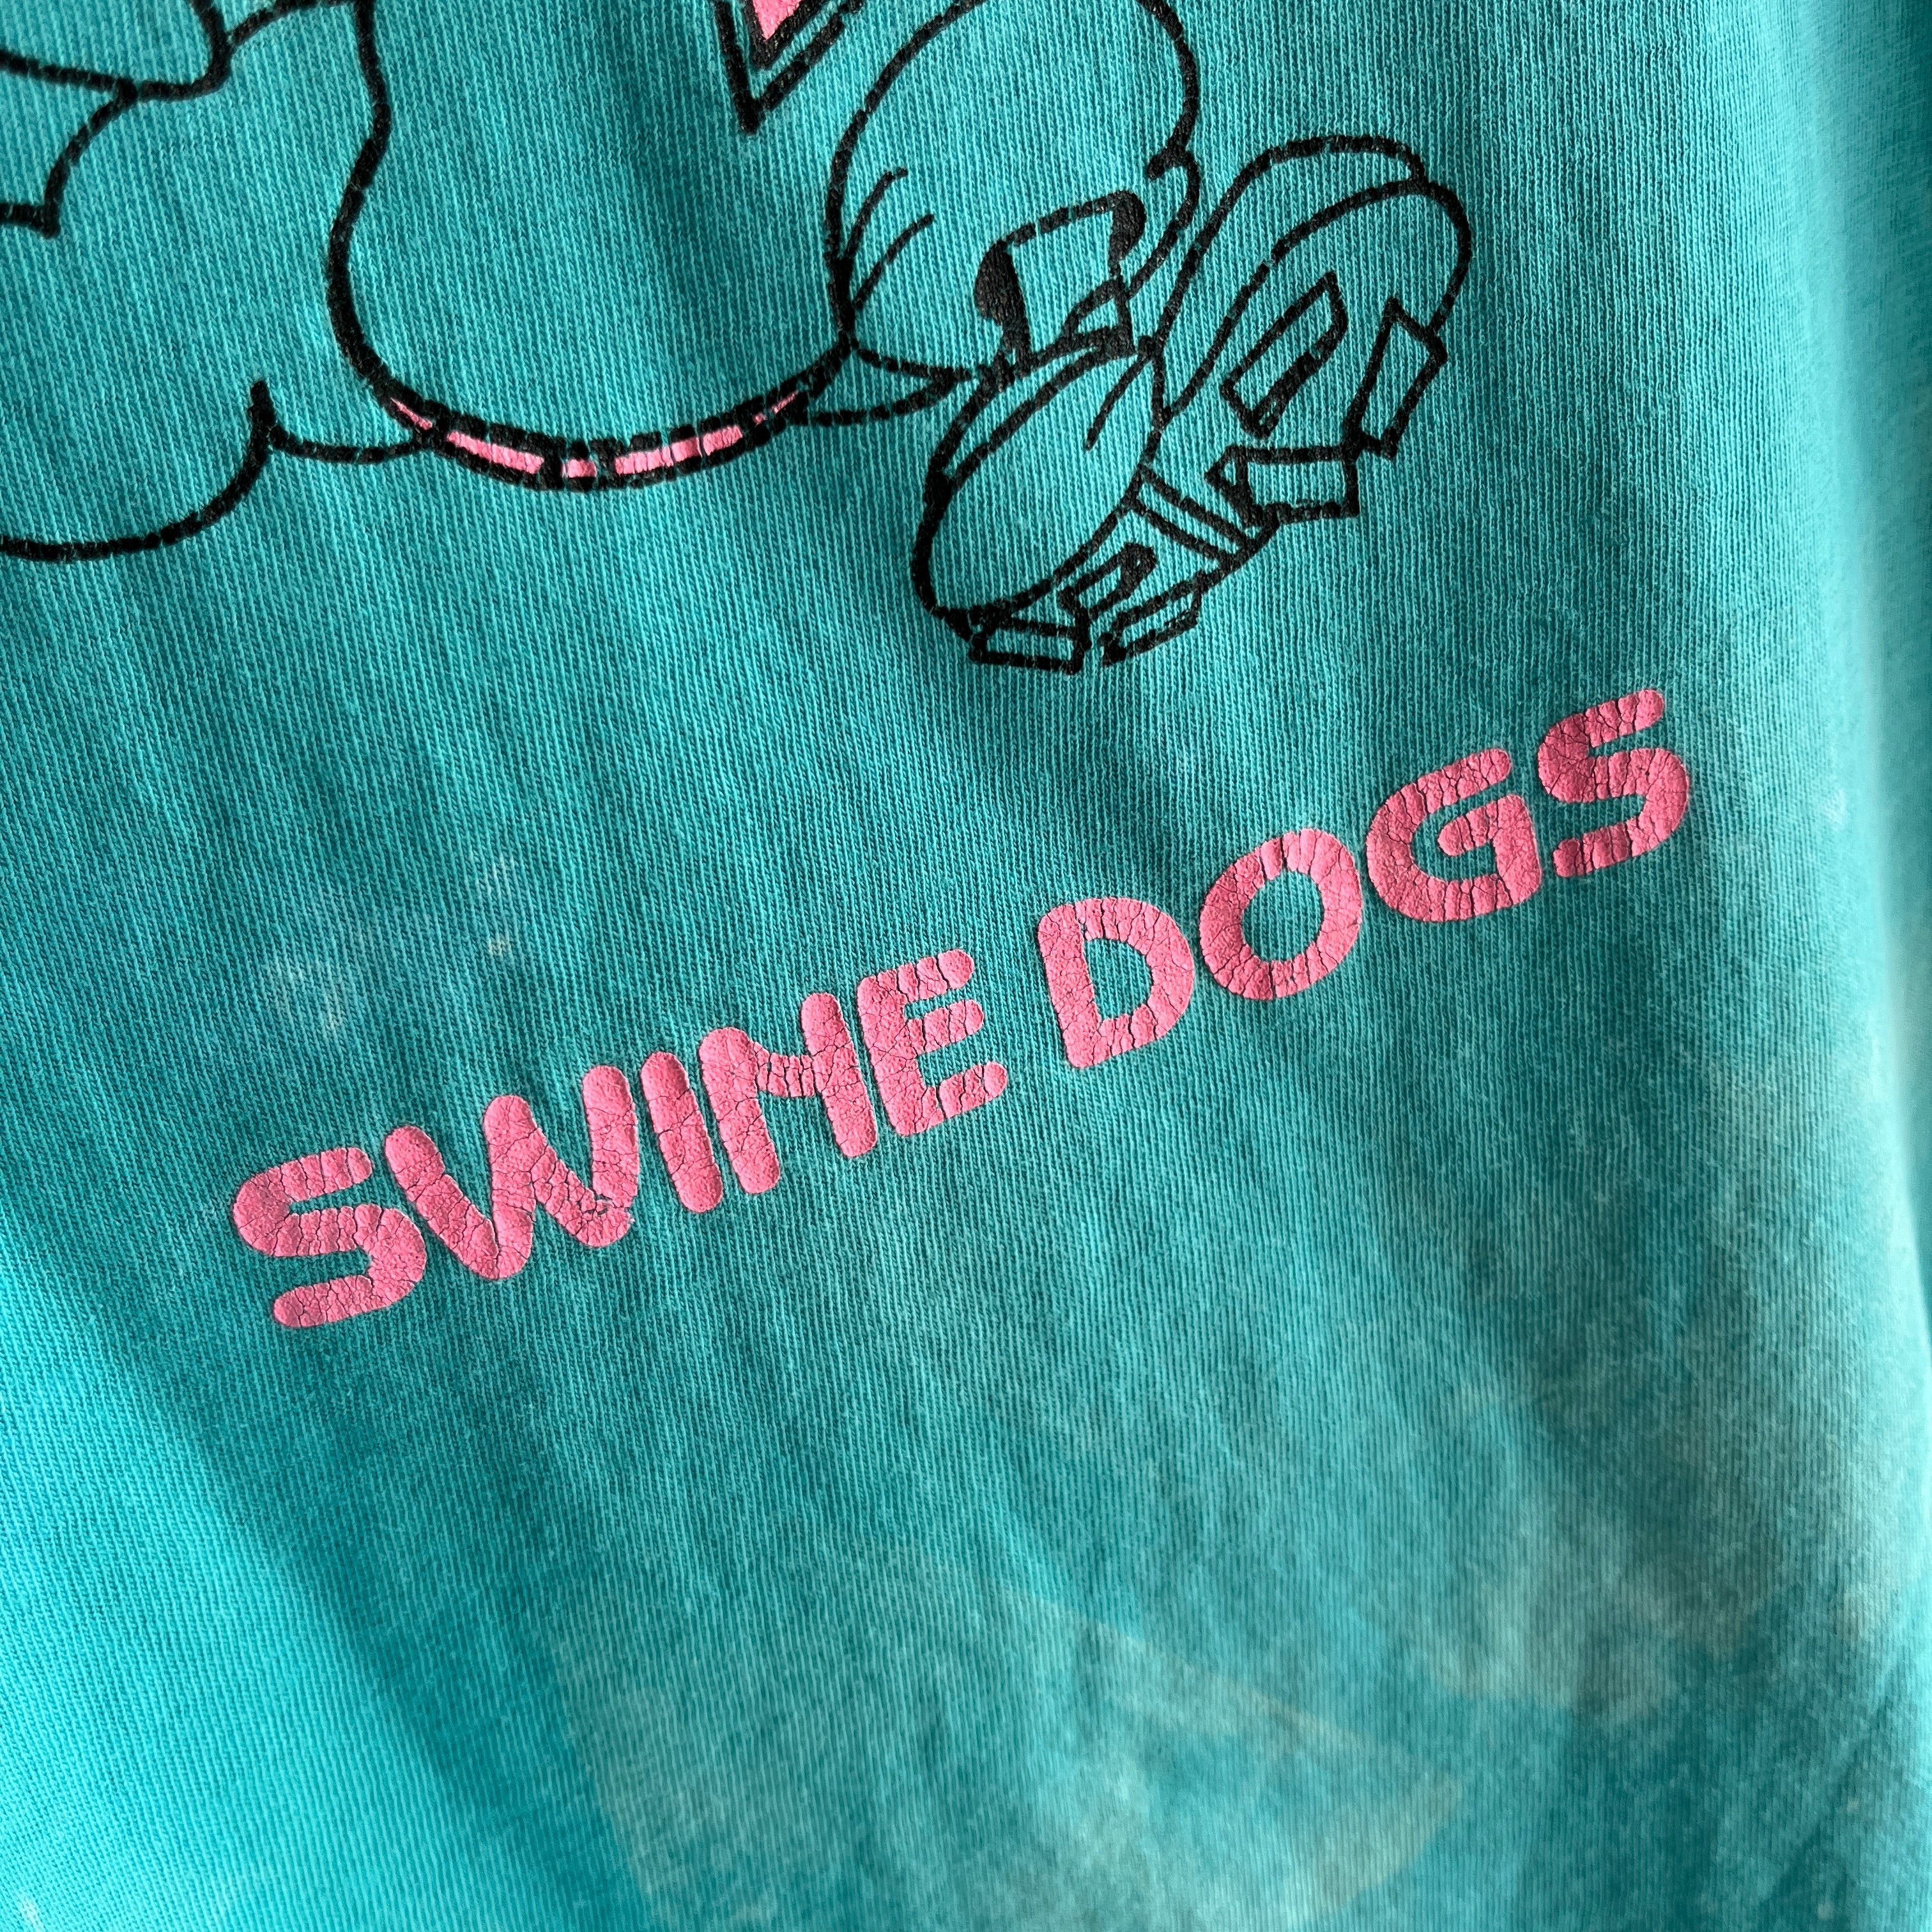 1990s Swine Dogs - Front and Back T-Shirt with Bleach Staining